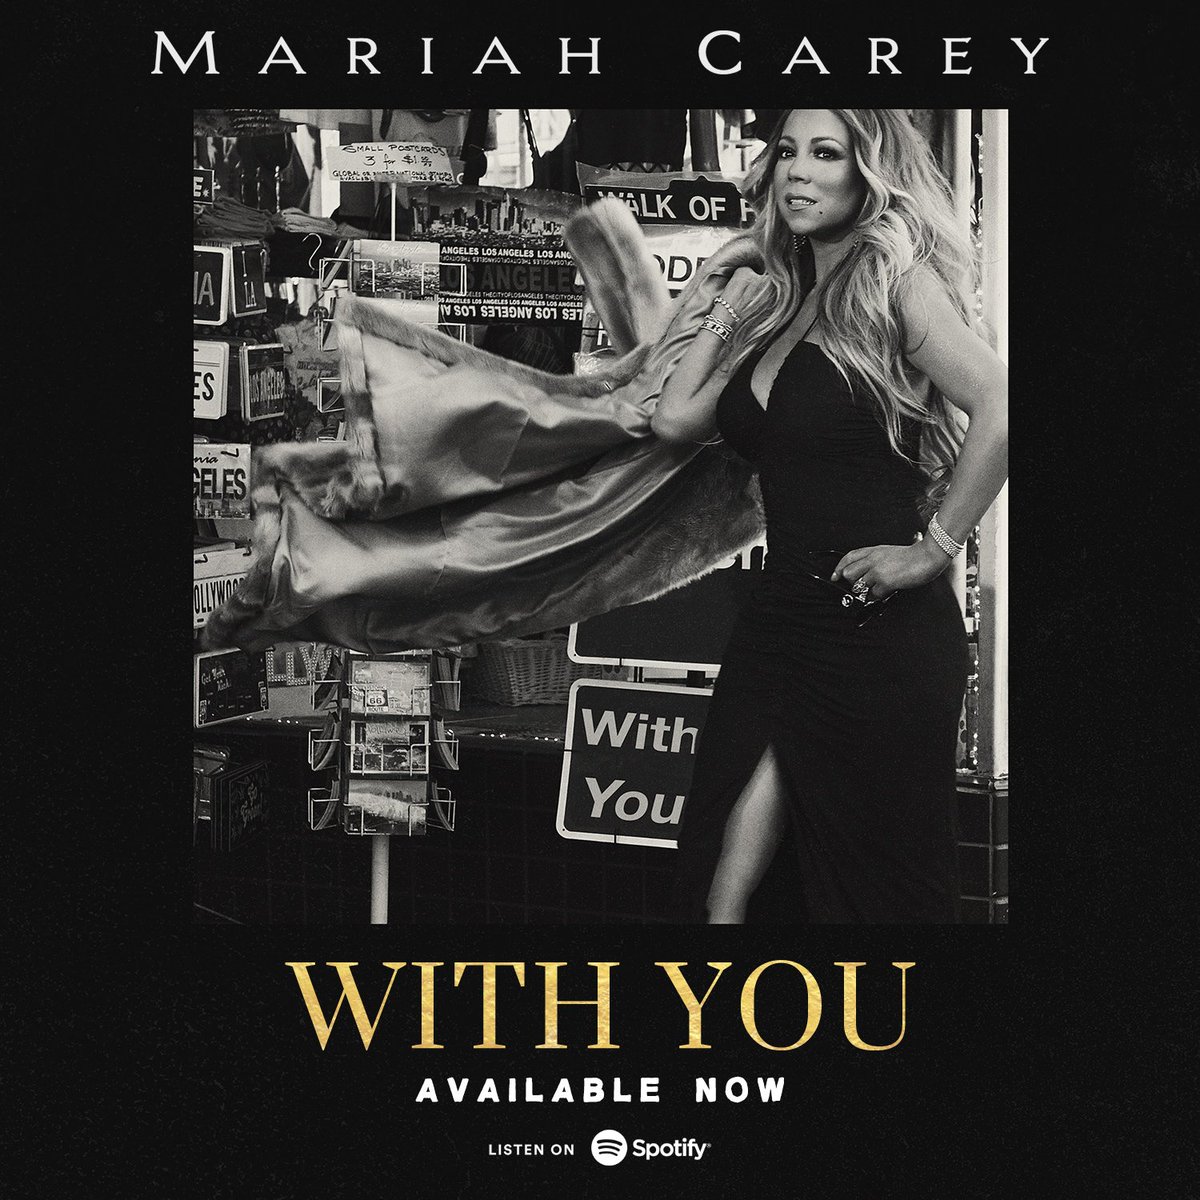 Lambs, my new single #WithYou is out on @Spotify  ???????? Love you much! https://t.co/uUgpuCkNmO https://t.co/SqOb3GZ0ZQ